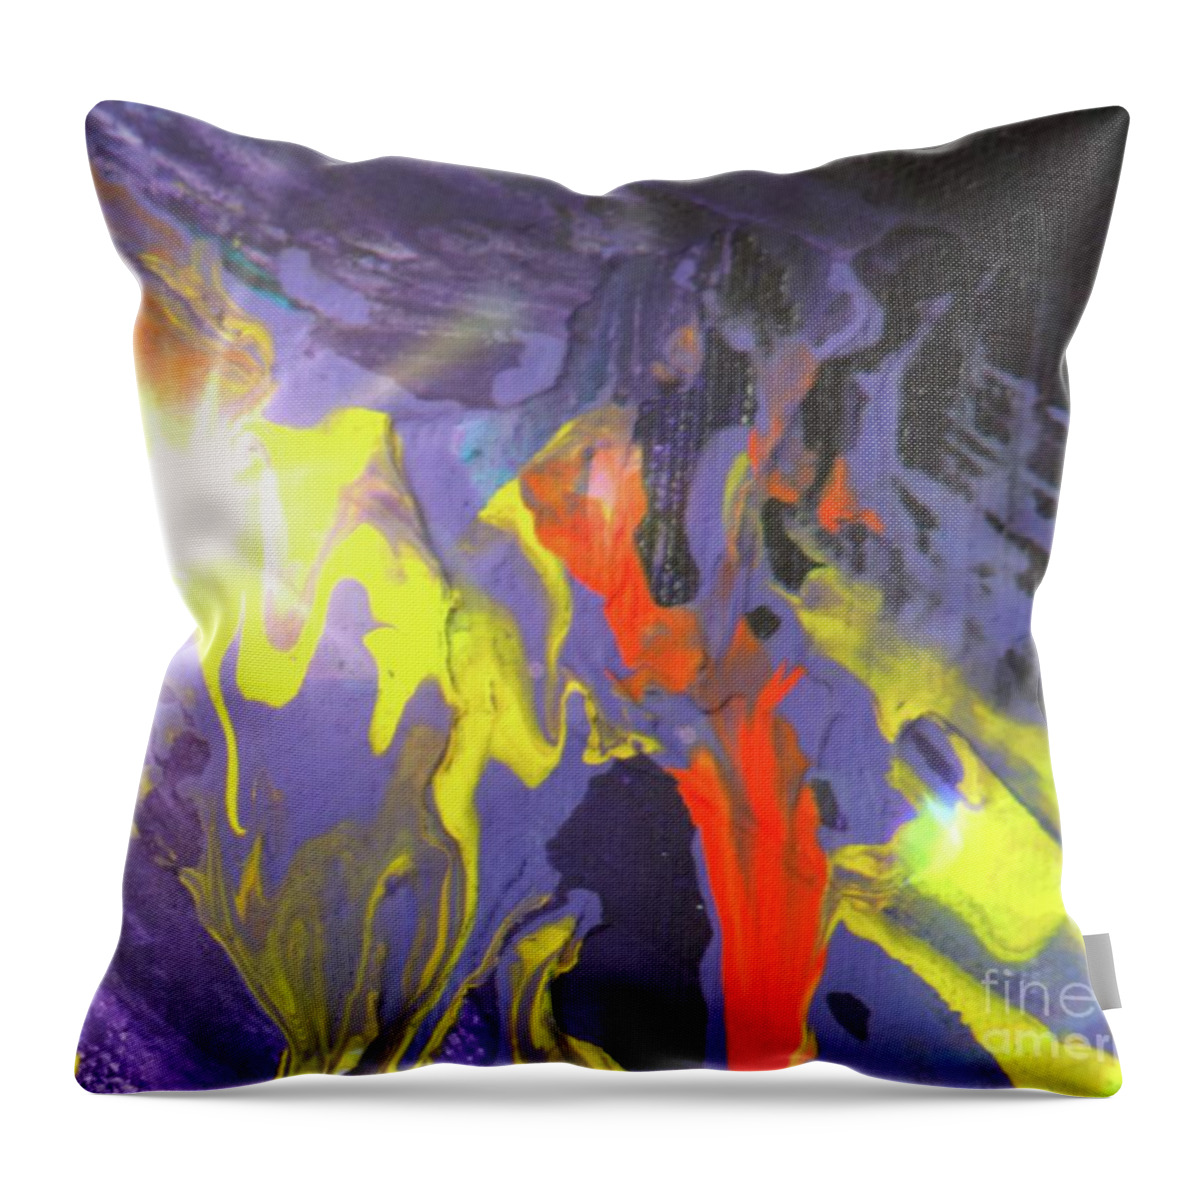 Paint Throw Pillow featuring the digital art Conscious Battle by Yvonne Padmos